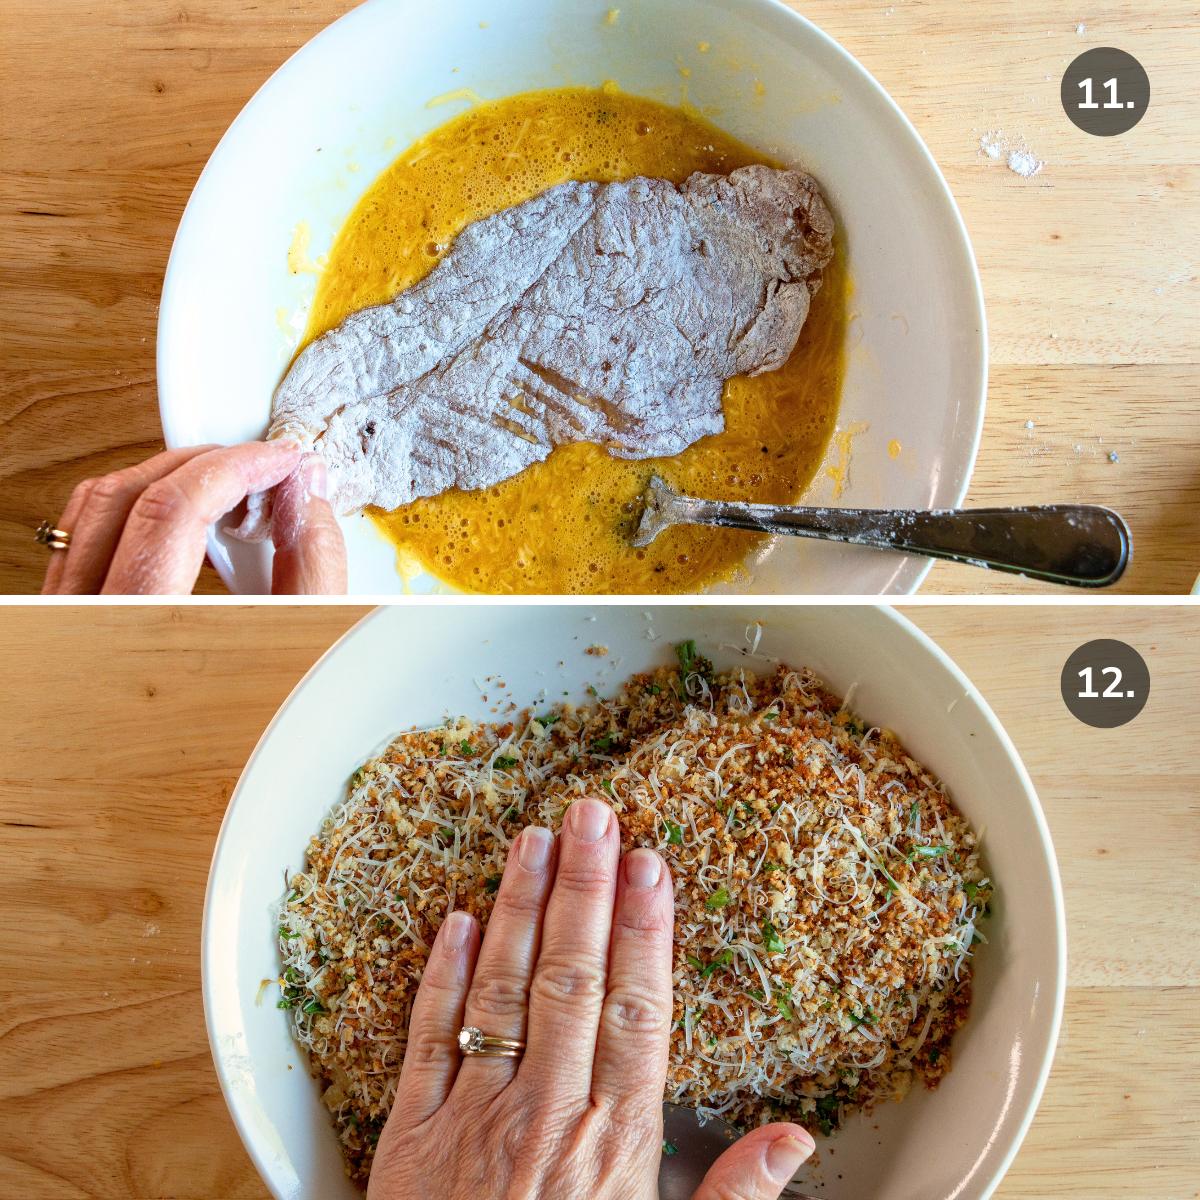 Dipping the chicken cutlets into the egg mixture and coating in the toasted panko bread crumb mixture. 